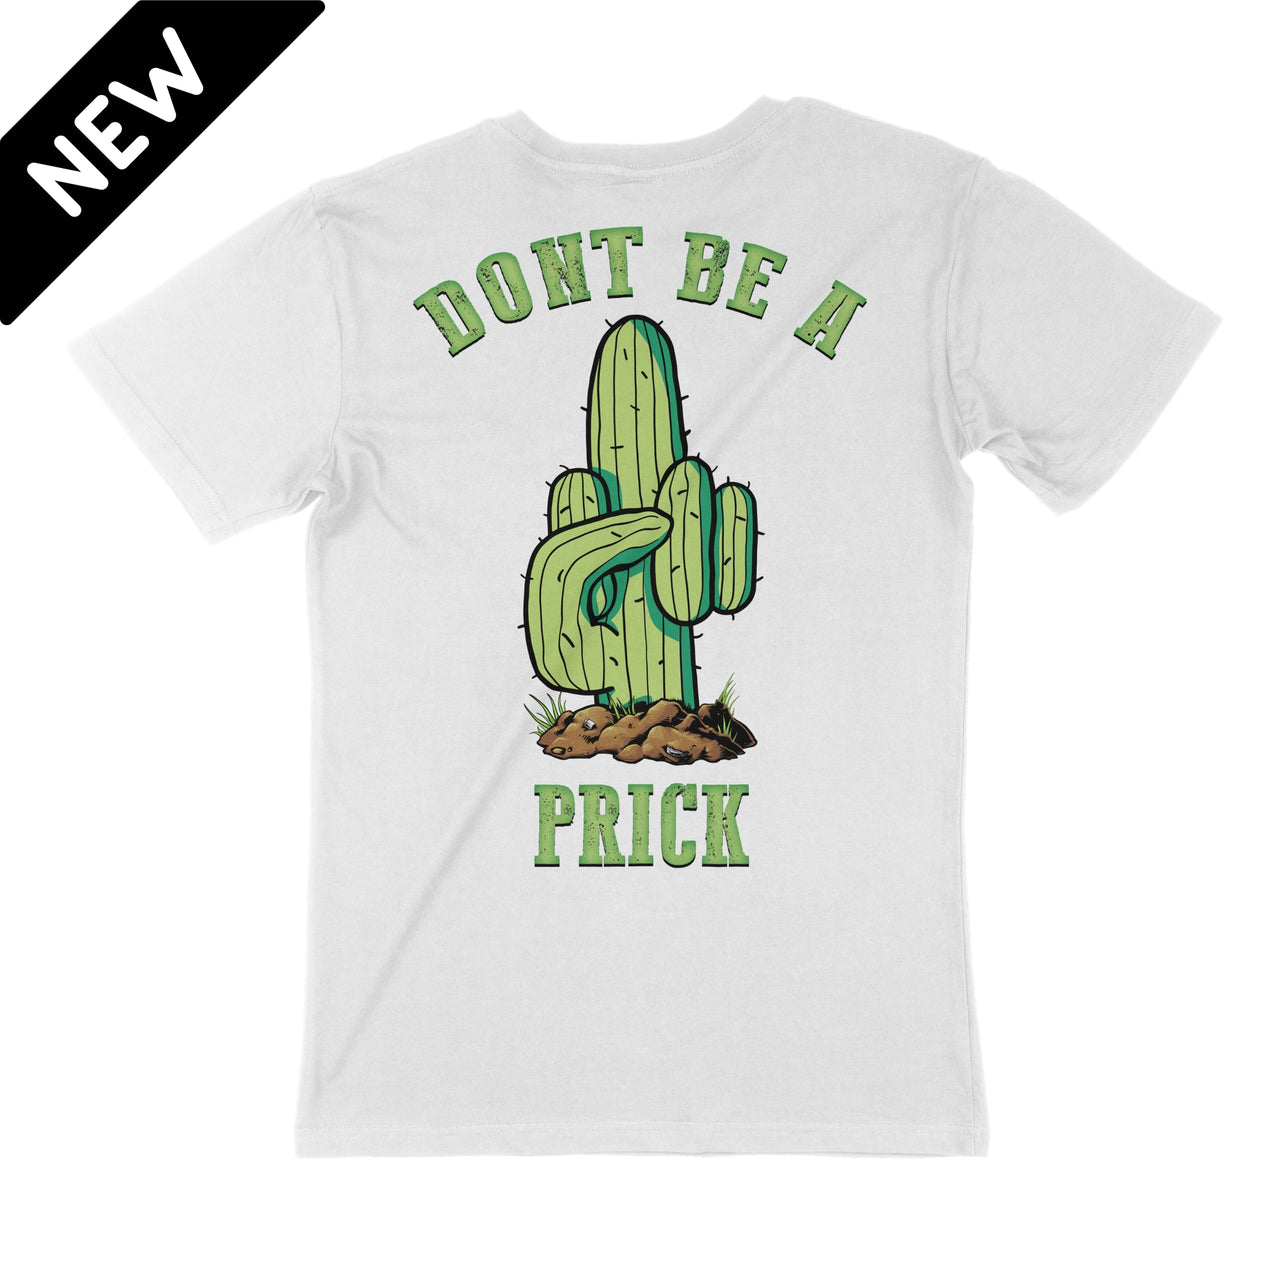 Dont Be A Prick